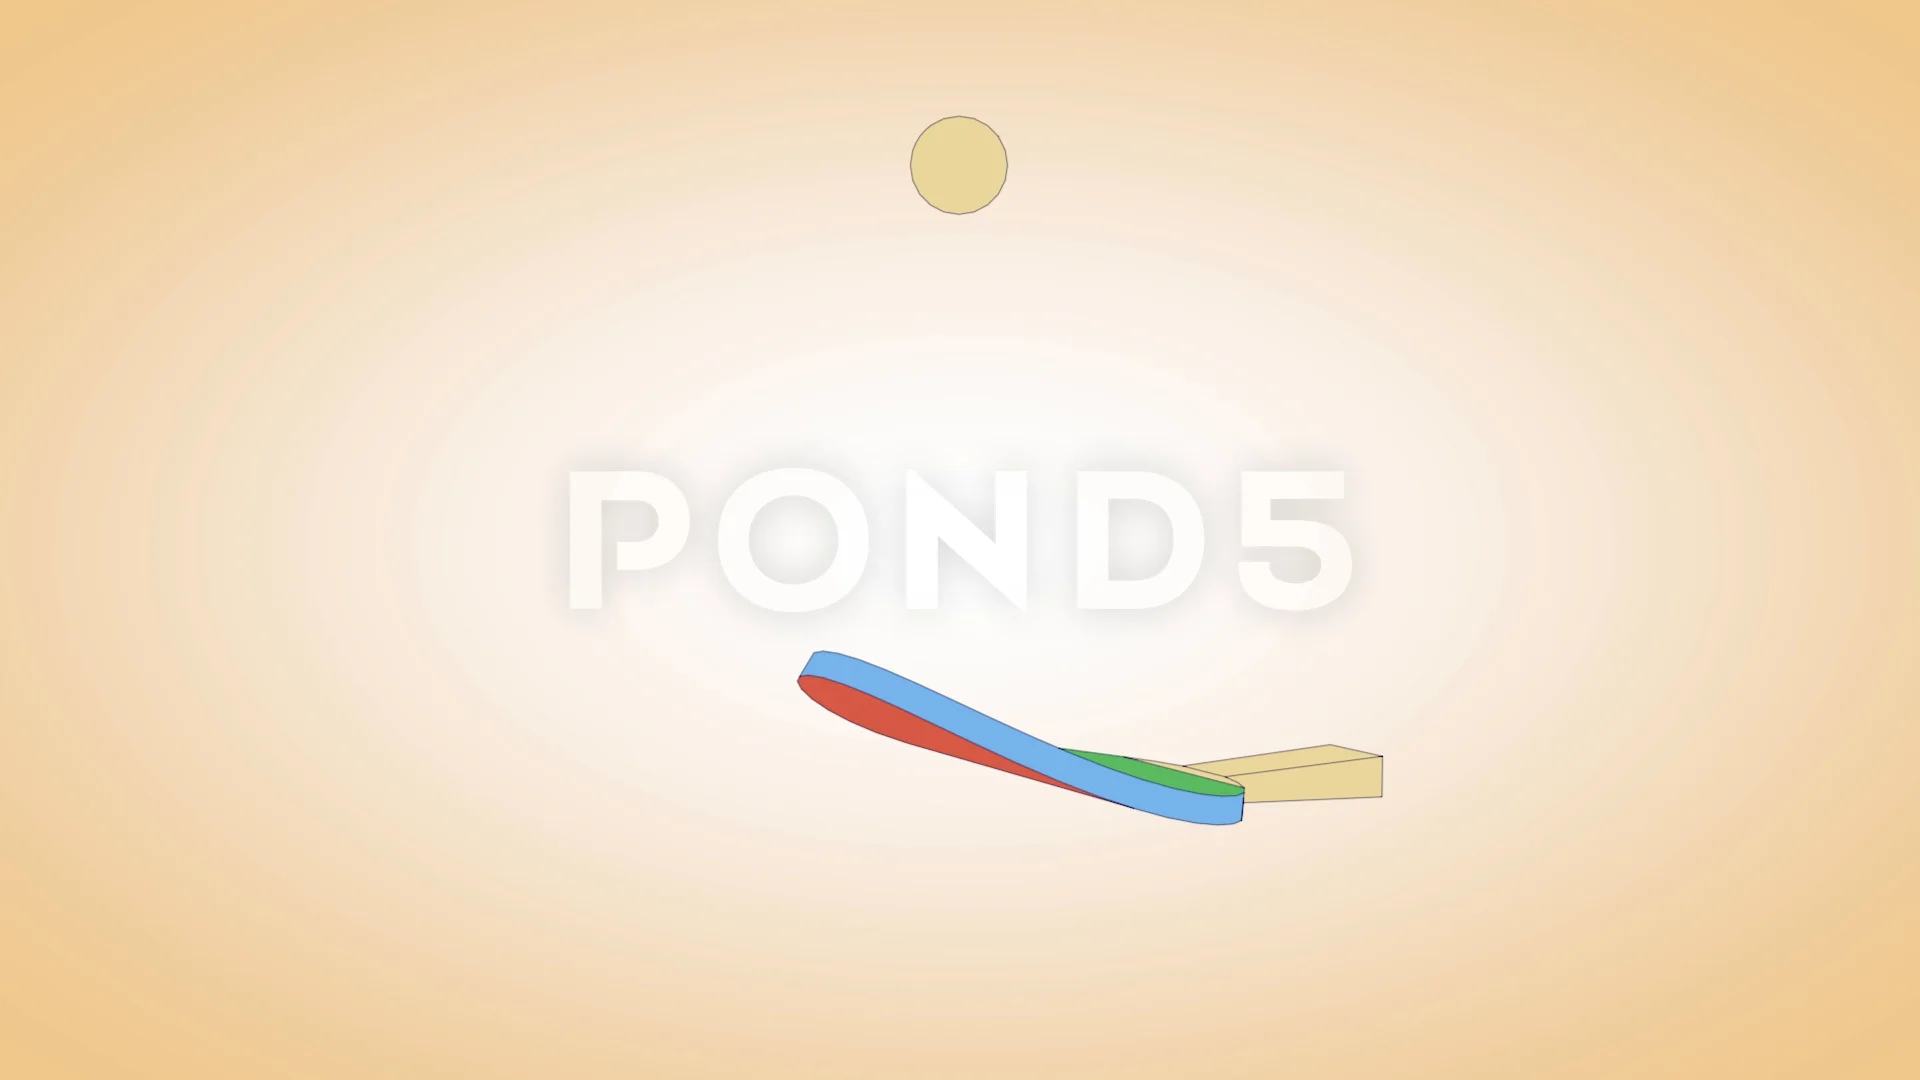 3D animation Ping pong game on blue back, Stock Video